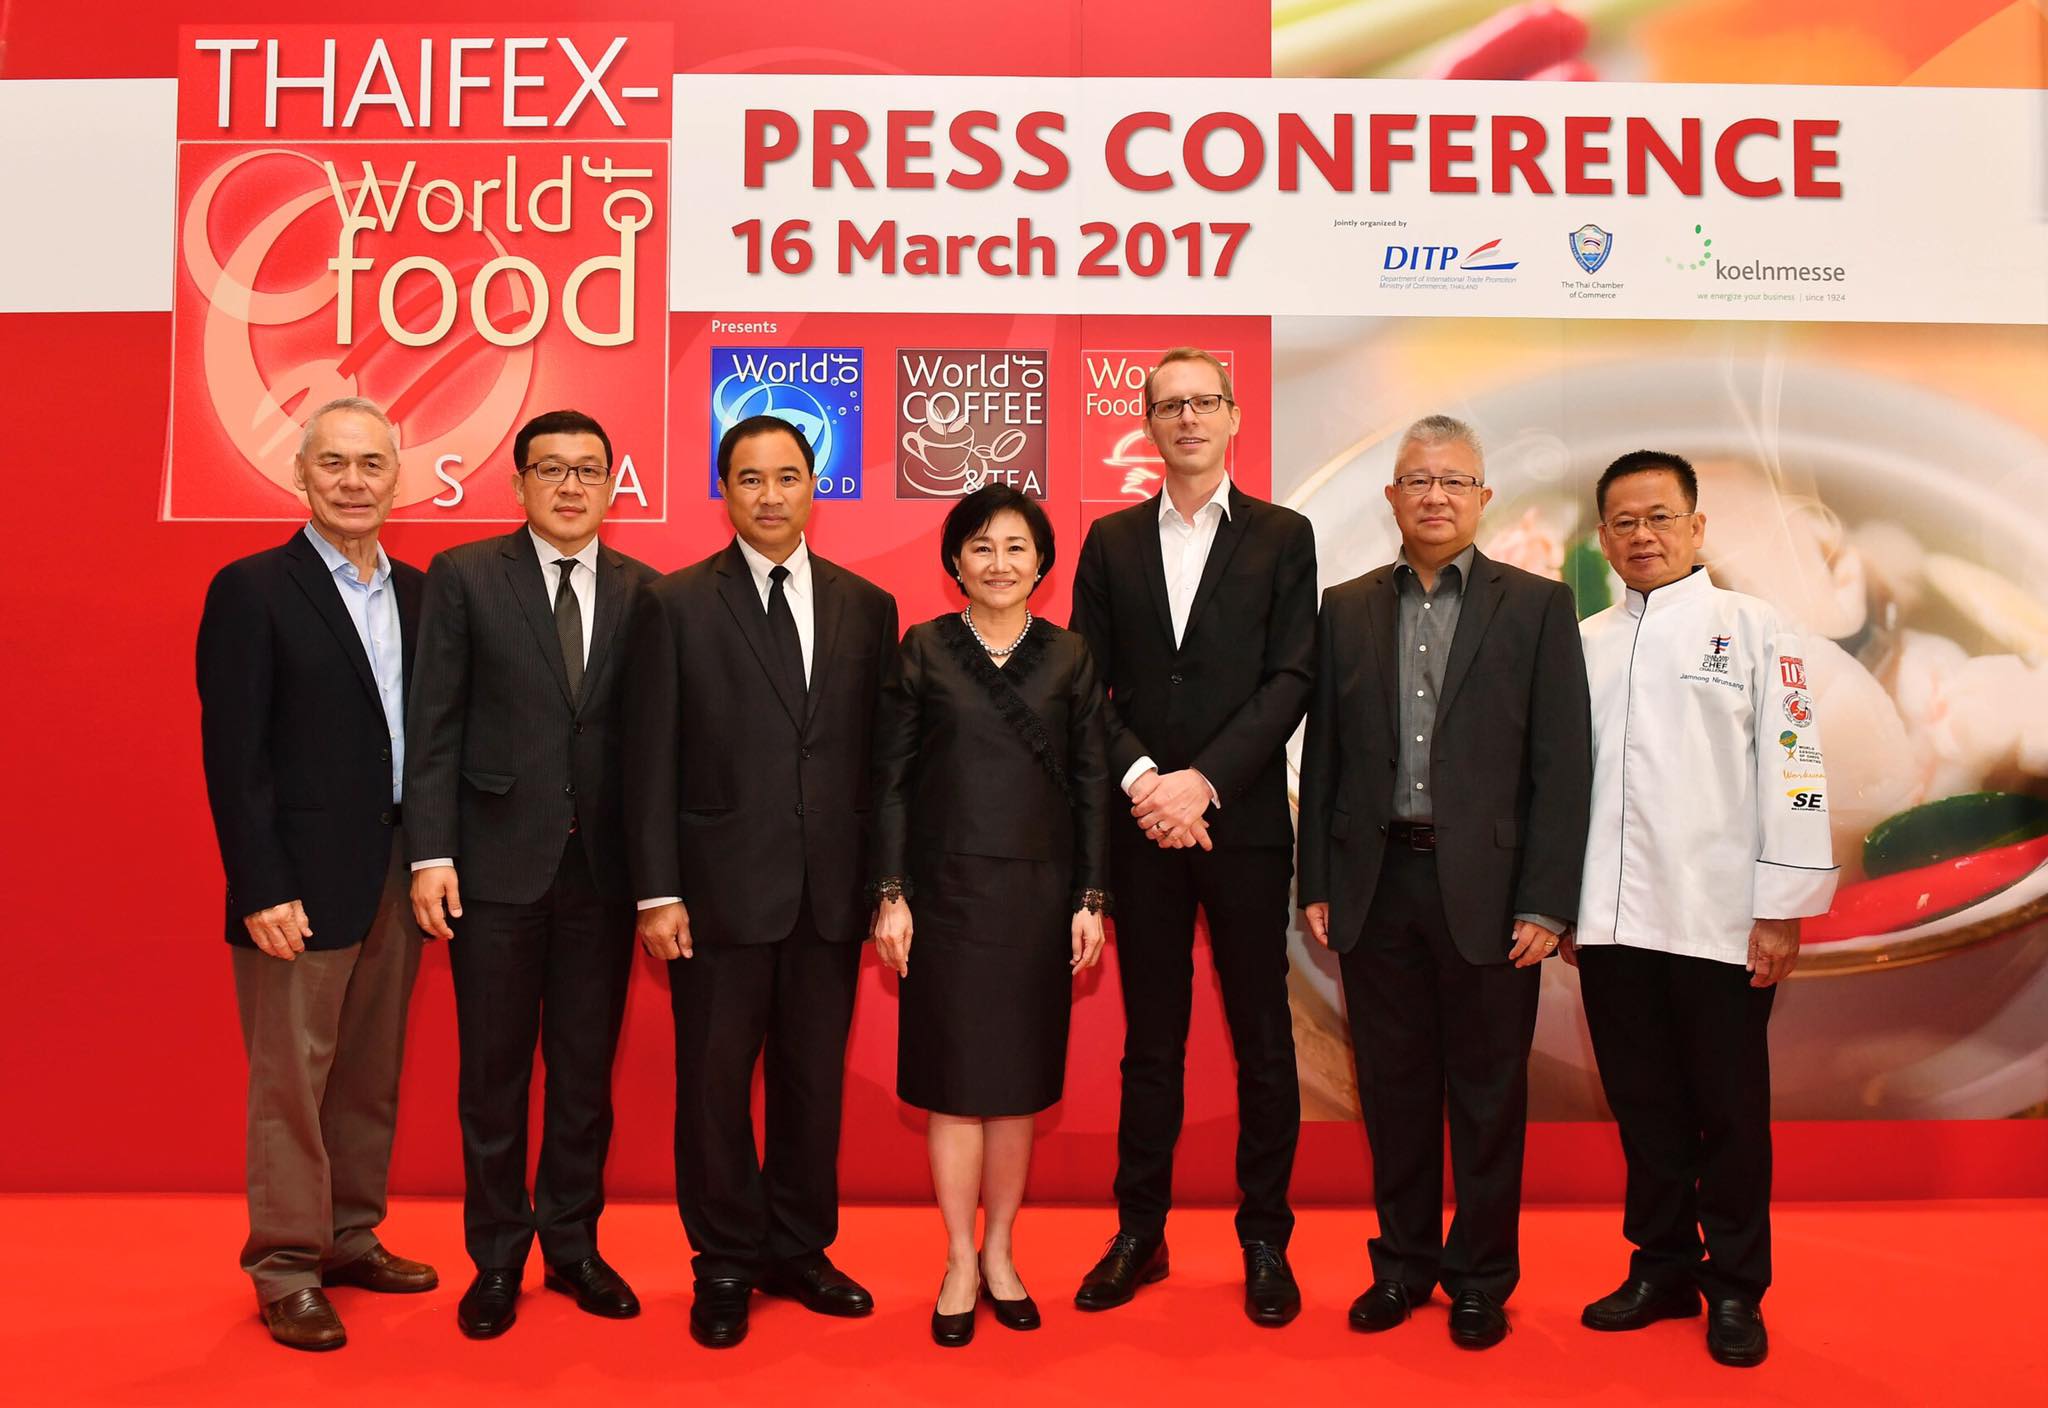 THAIFEX-World of Food Asia 2017